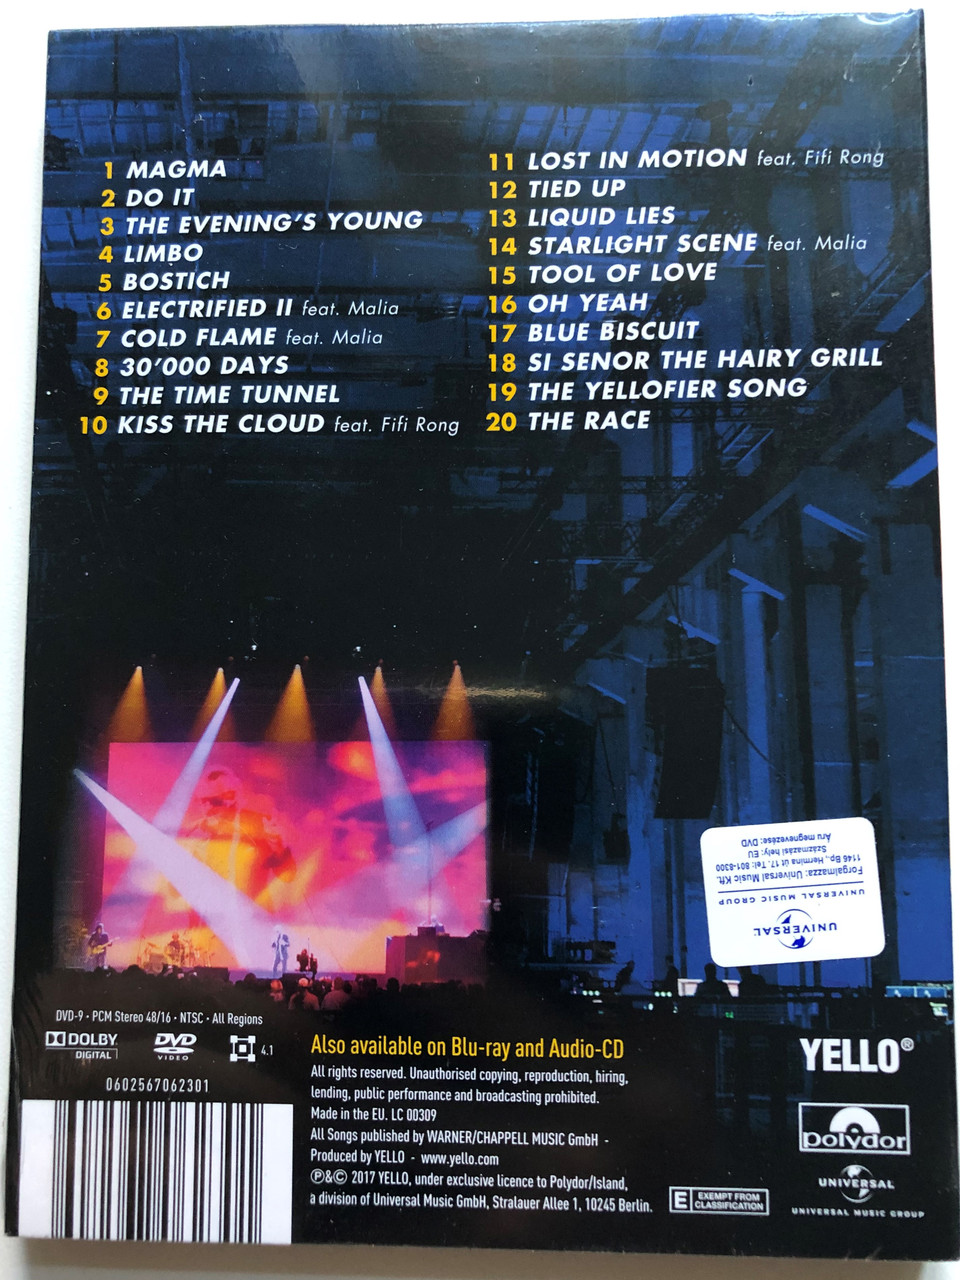 Yello – Live In Berlin / First Ever Live Concert / Incl. Songs from the  latest Studio-Album ' TOY' and the Hits 'Oh Yeah' & 'The Race' + many more  / Polydor DVD Video 2017 / 0602567062301 - bibleinmylanguage